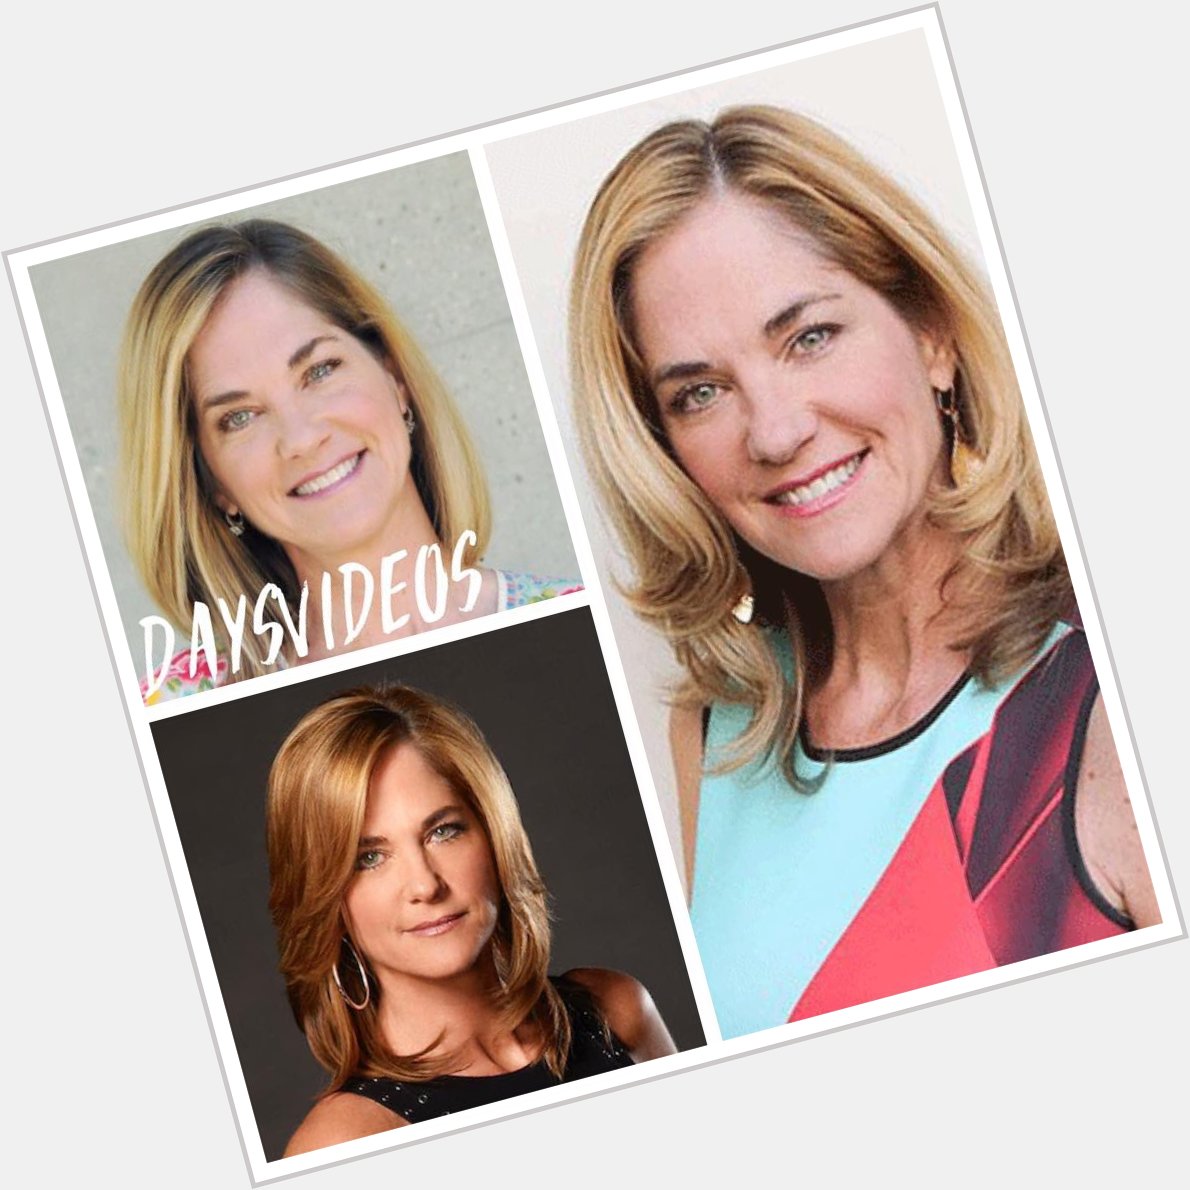 Happy Birthday to Kassie DePaiva (Eve) who turns 58 today!  